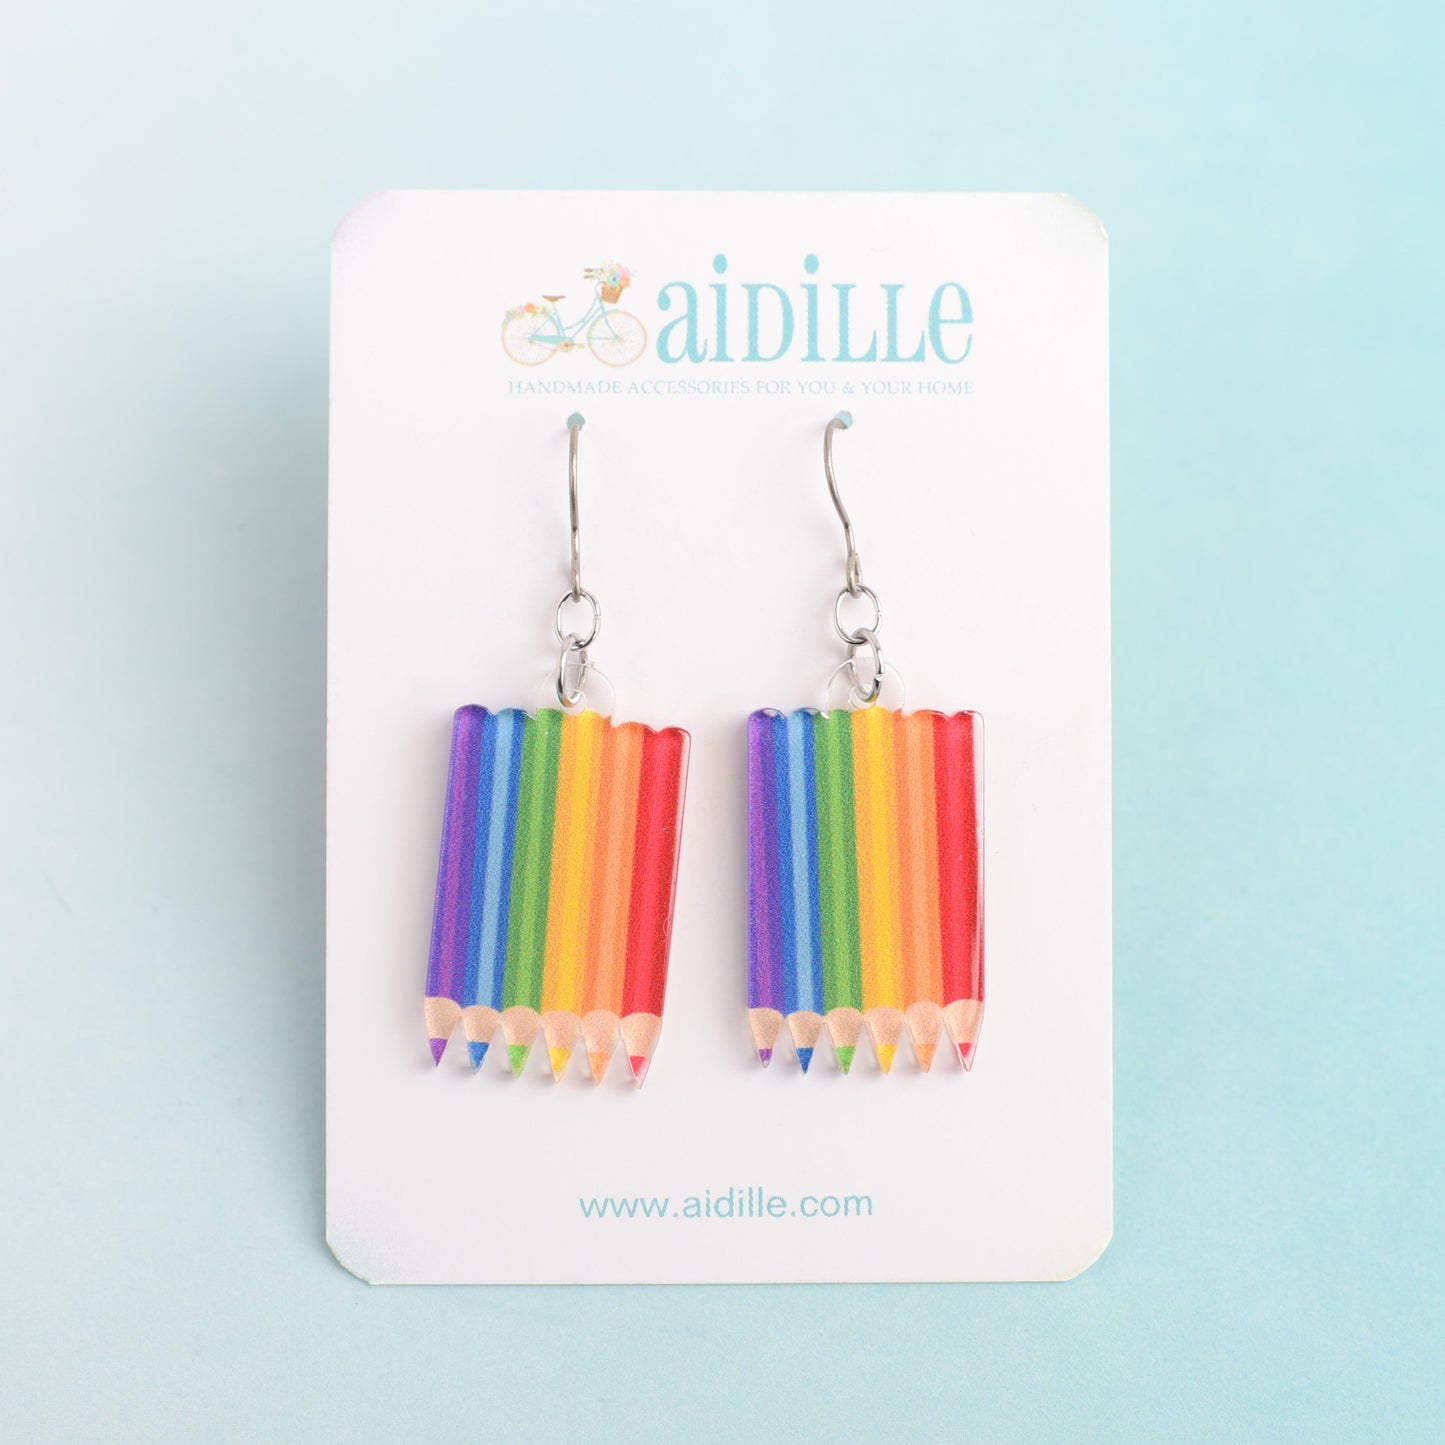 Colored Pencil Earrings with Titanium Ear Wires